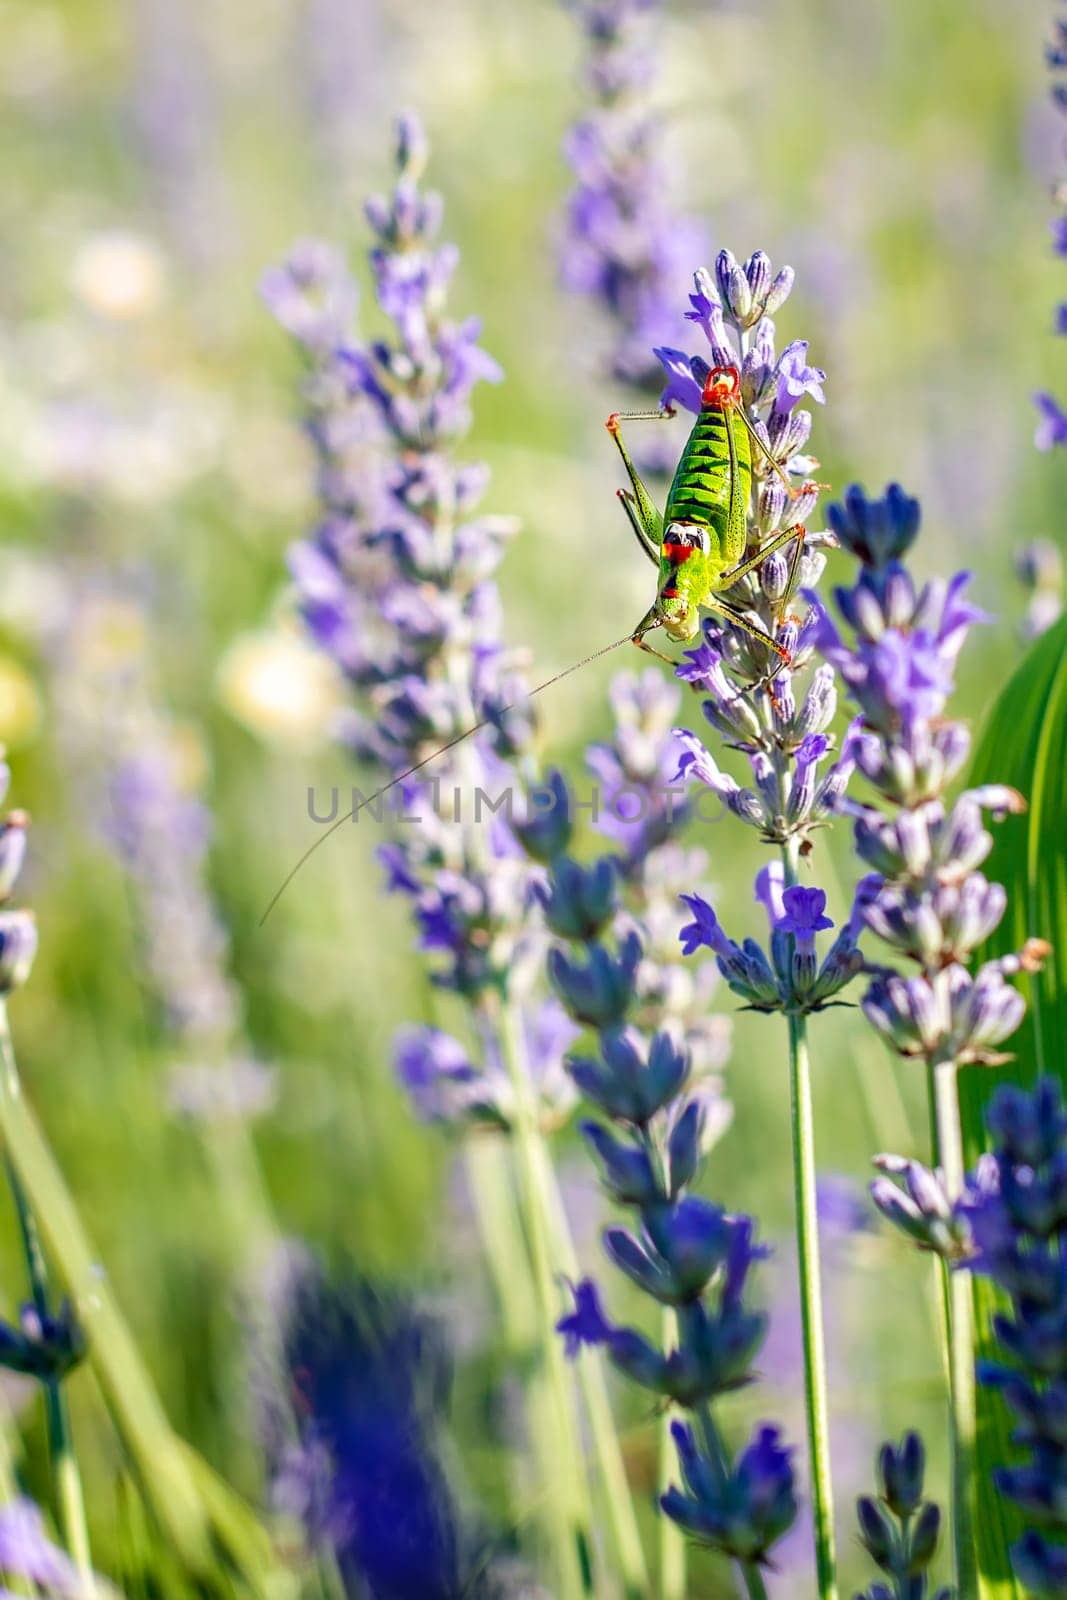  A colorful grasshopper sits on a lavender flower.